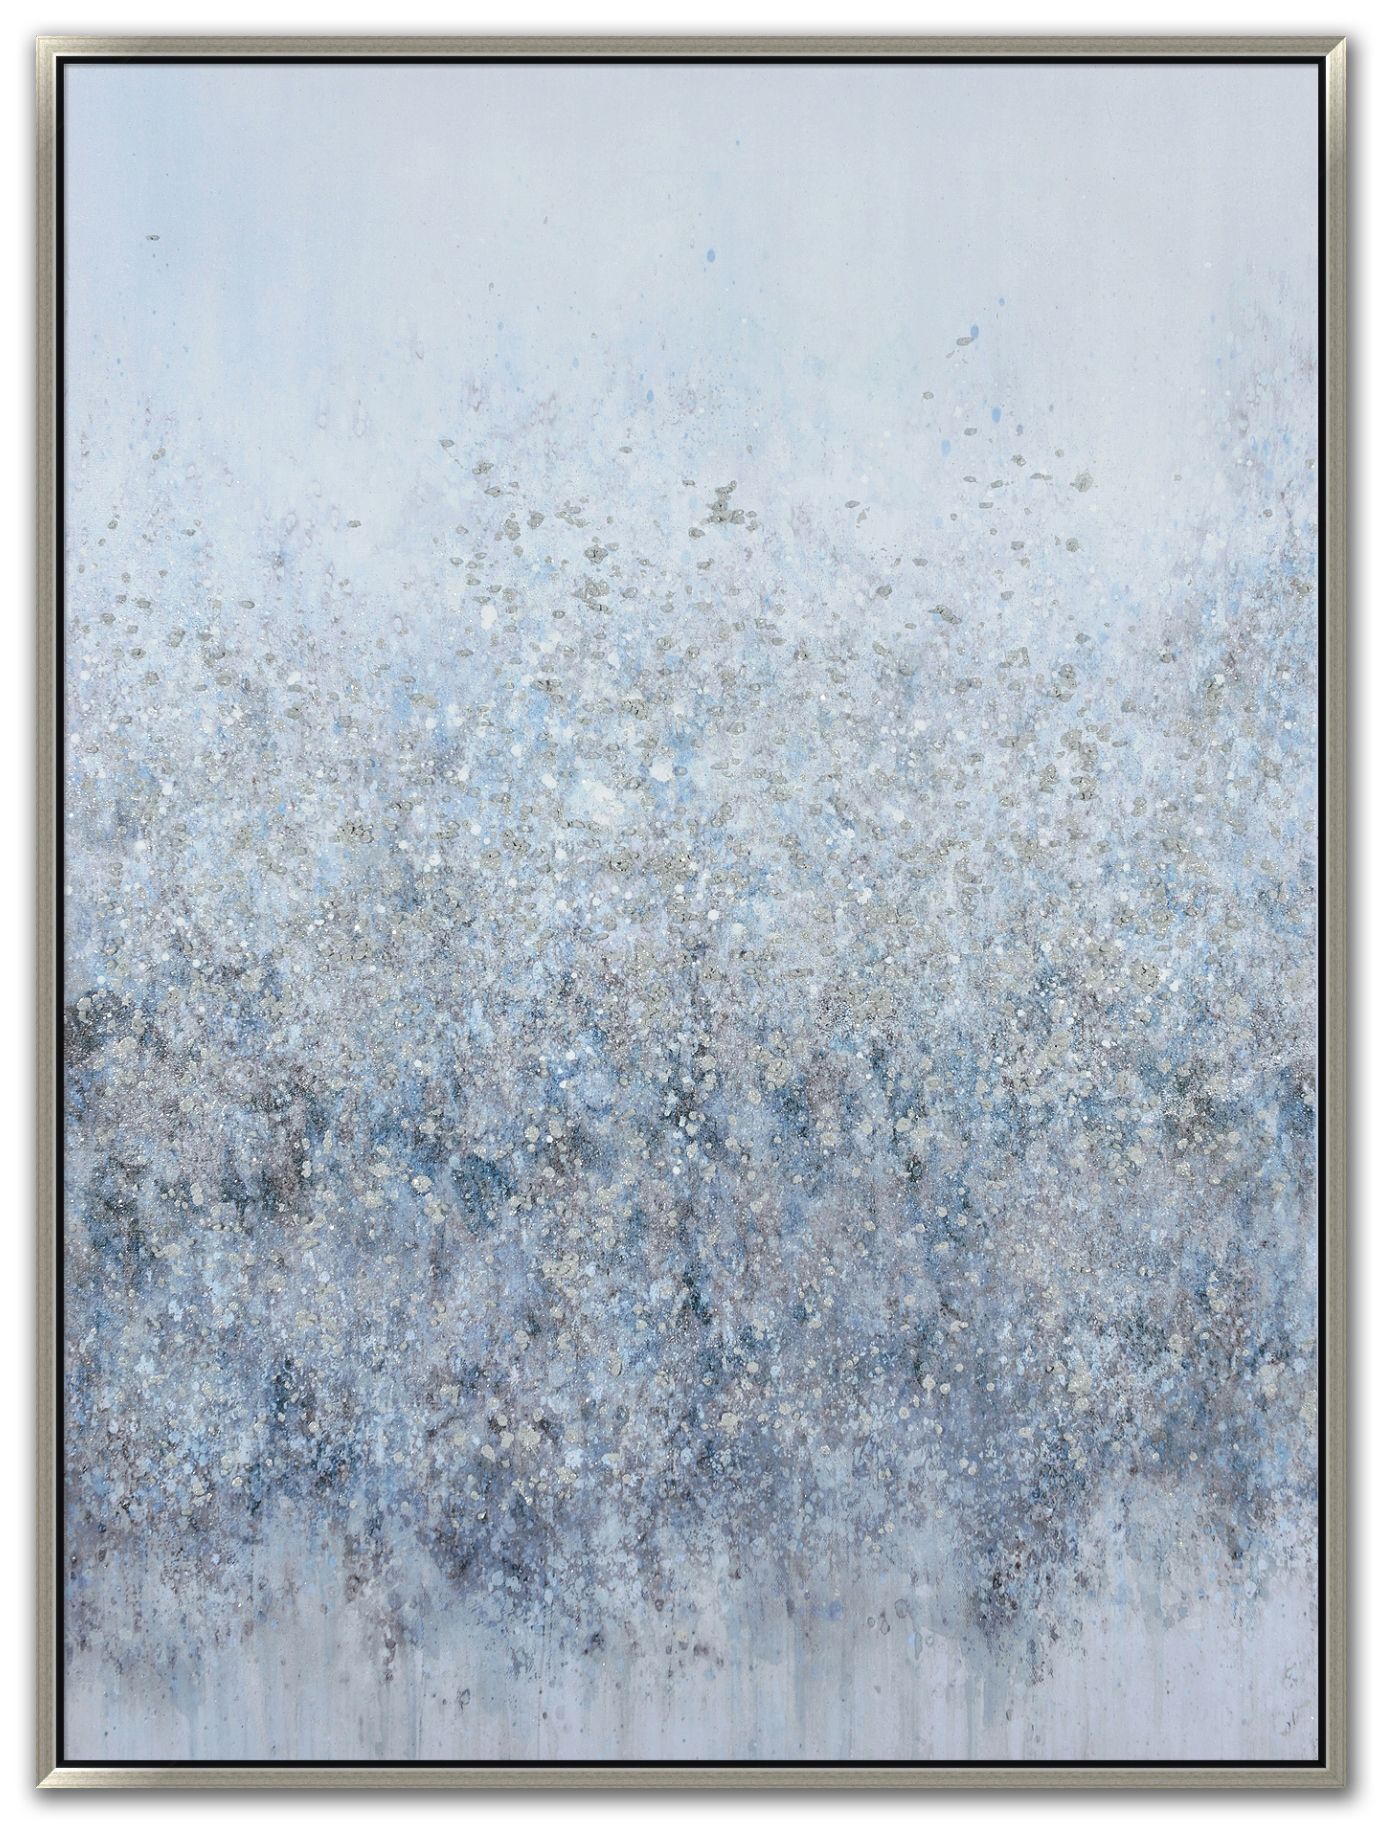 36" x 48"
Oil painting on gallery wrapped canvas with raised texture in a silver floating frame
$299